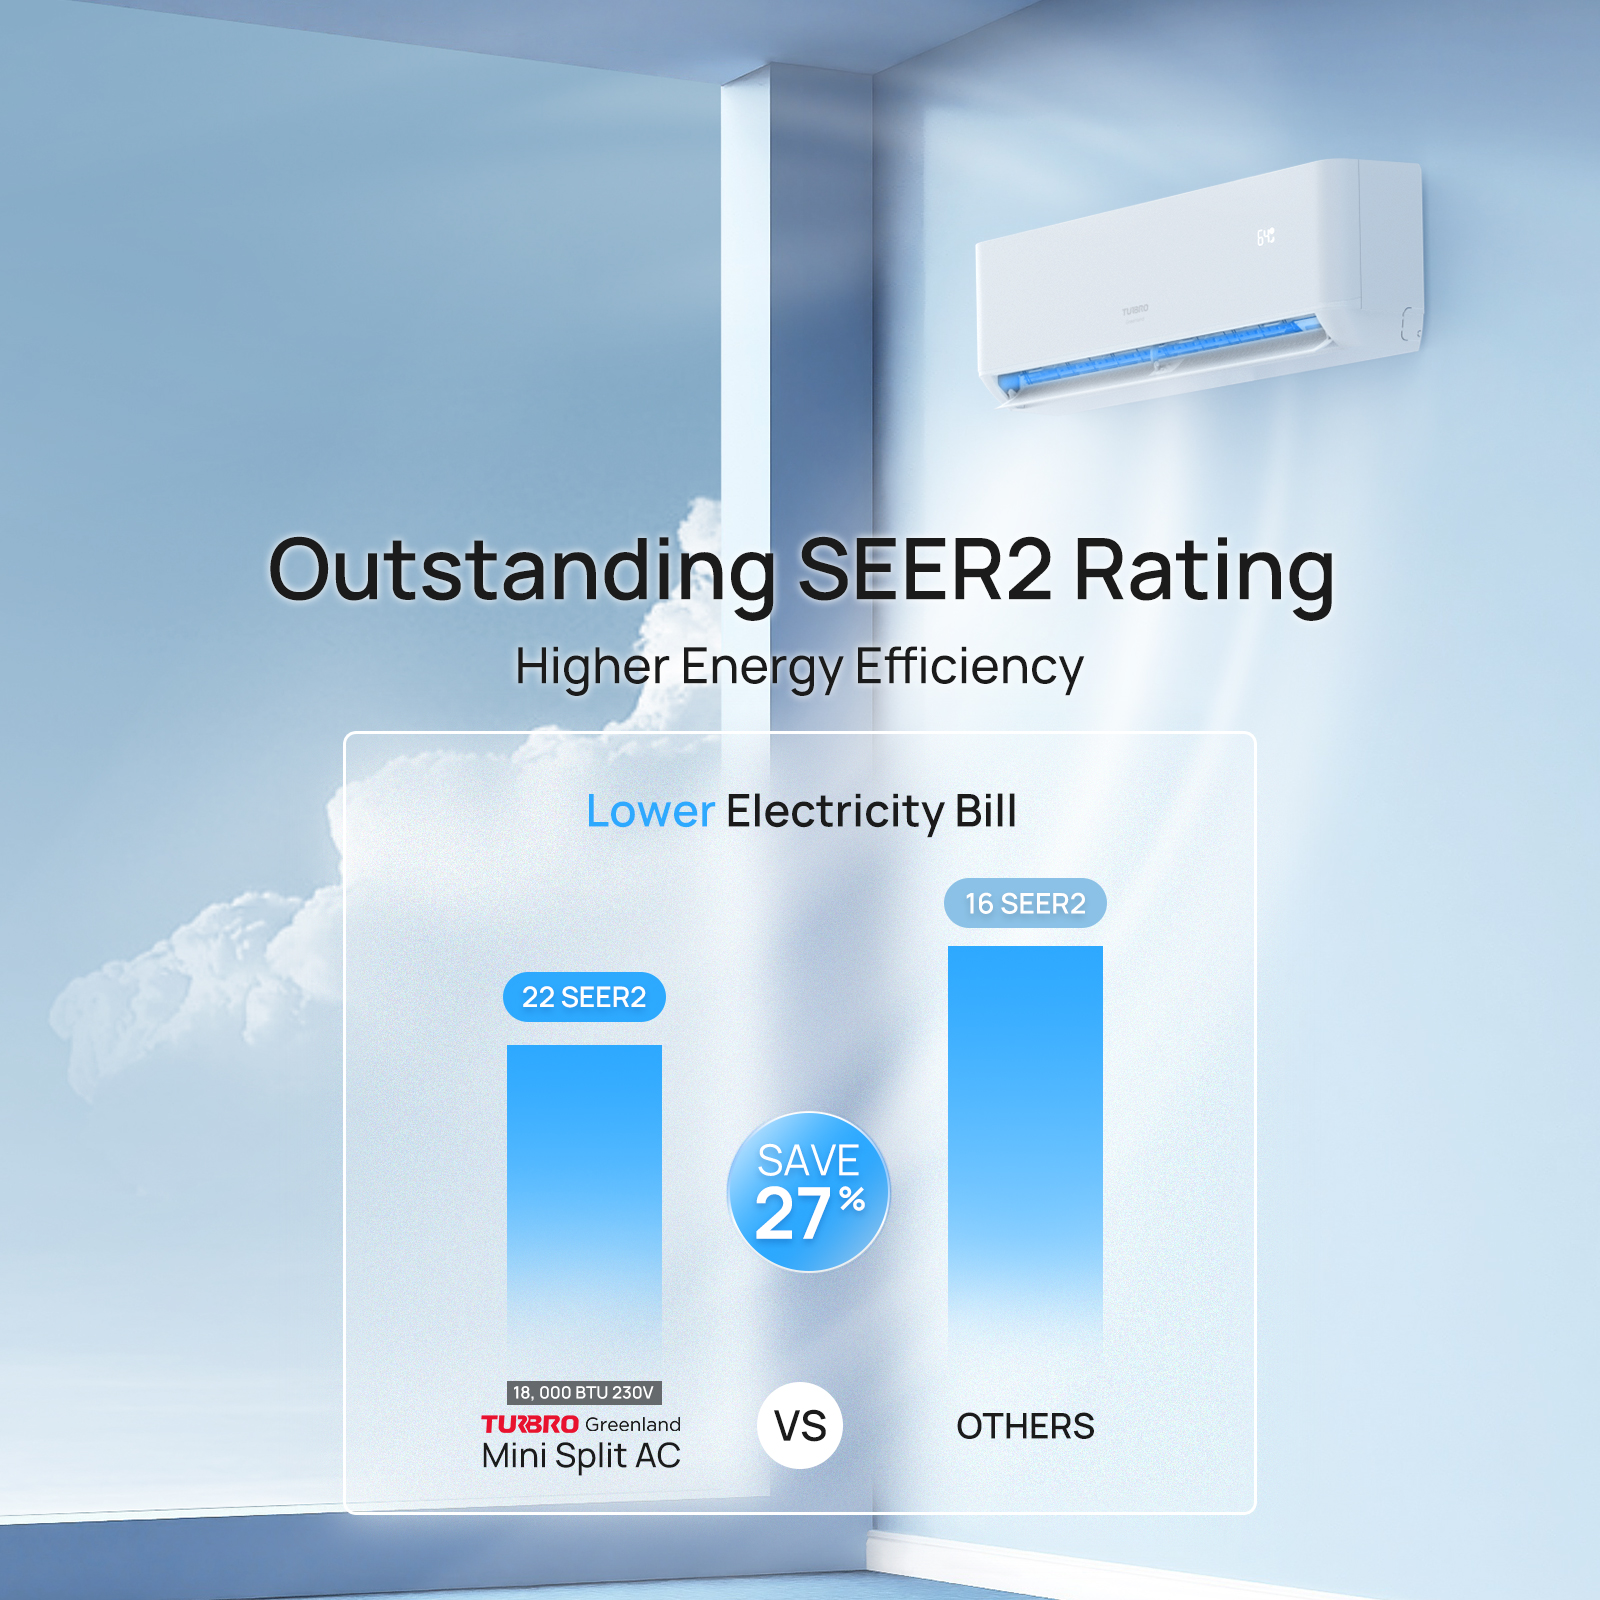 TURBRO 18,000 BTU Ductless Mini Split Inverter AC with Heat Pump, 22 SEER2, 230V, WiFi-Enabled, Cools up to 1,200 Sq.Ft, Energy Star, Greenland Series - image 4 of 7